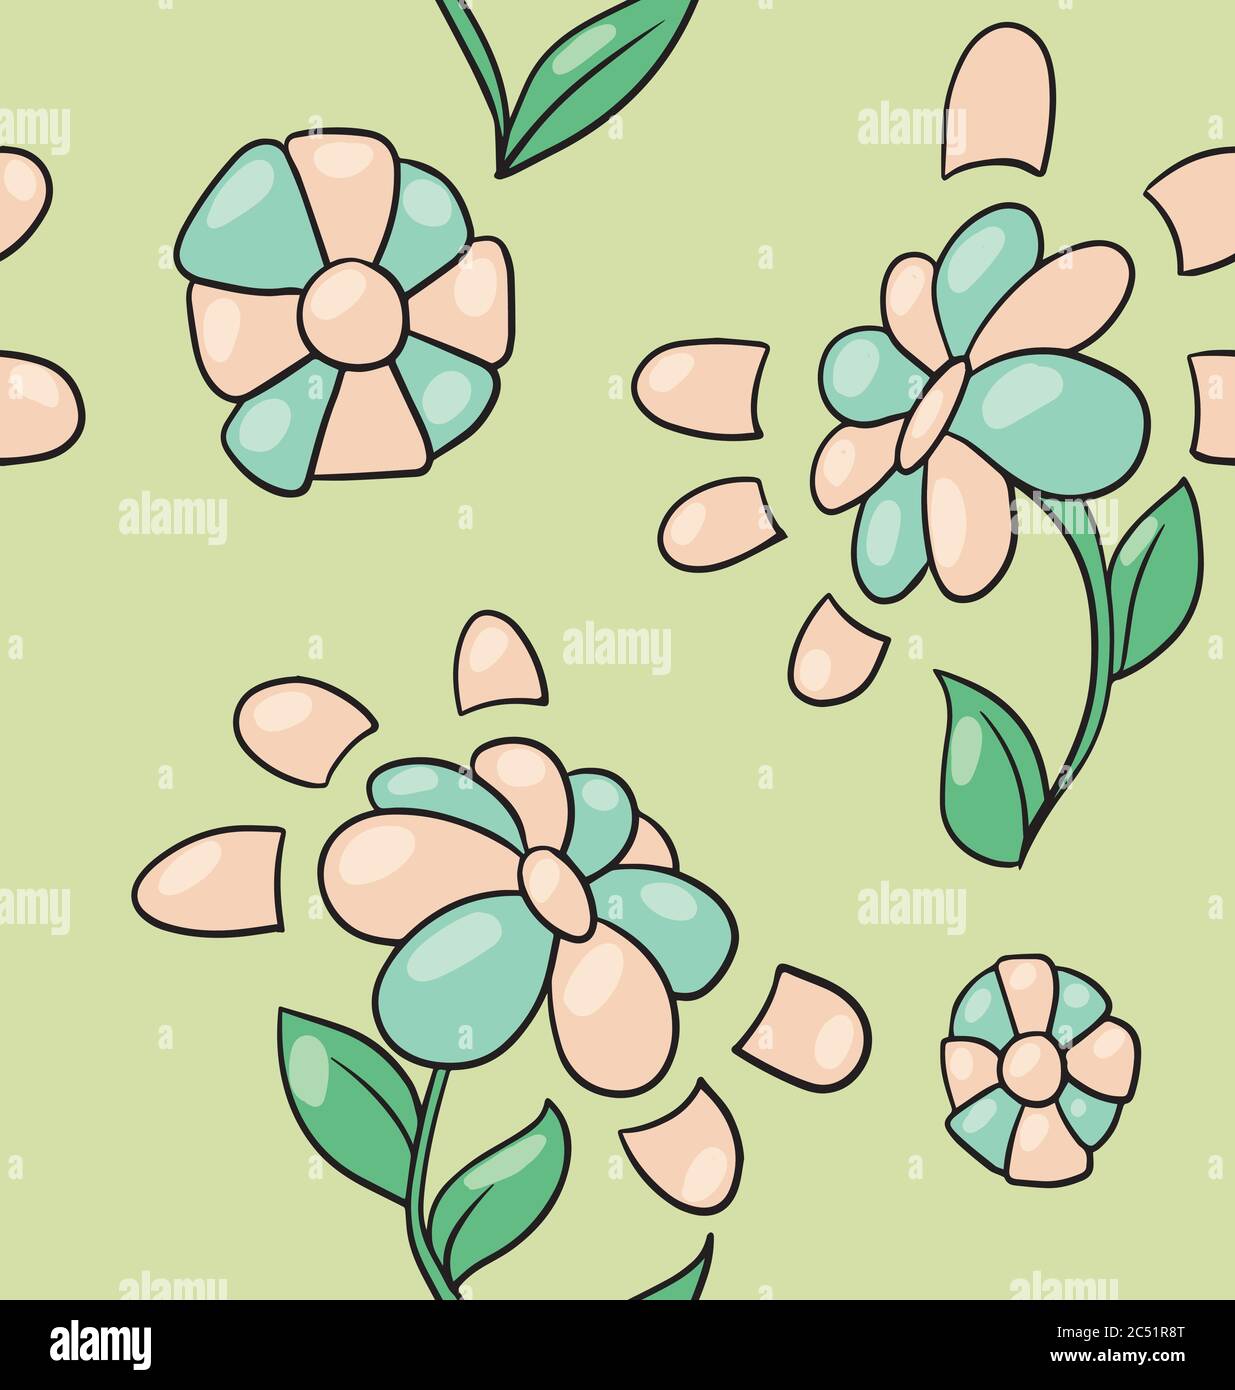 Seamless floral pattern in blue pink green Stock Vector